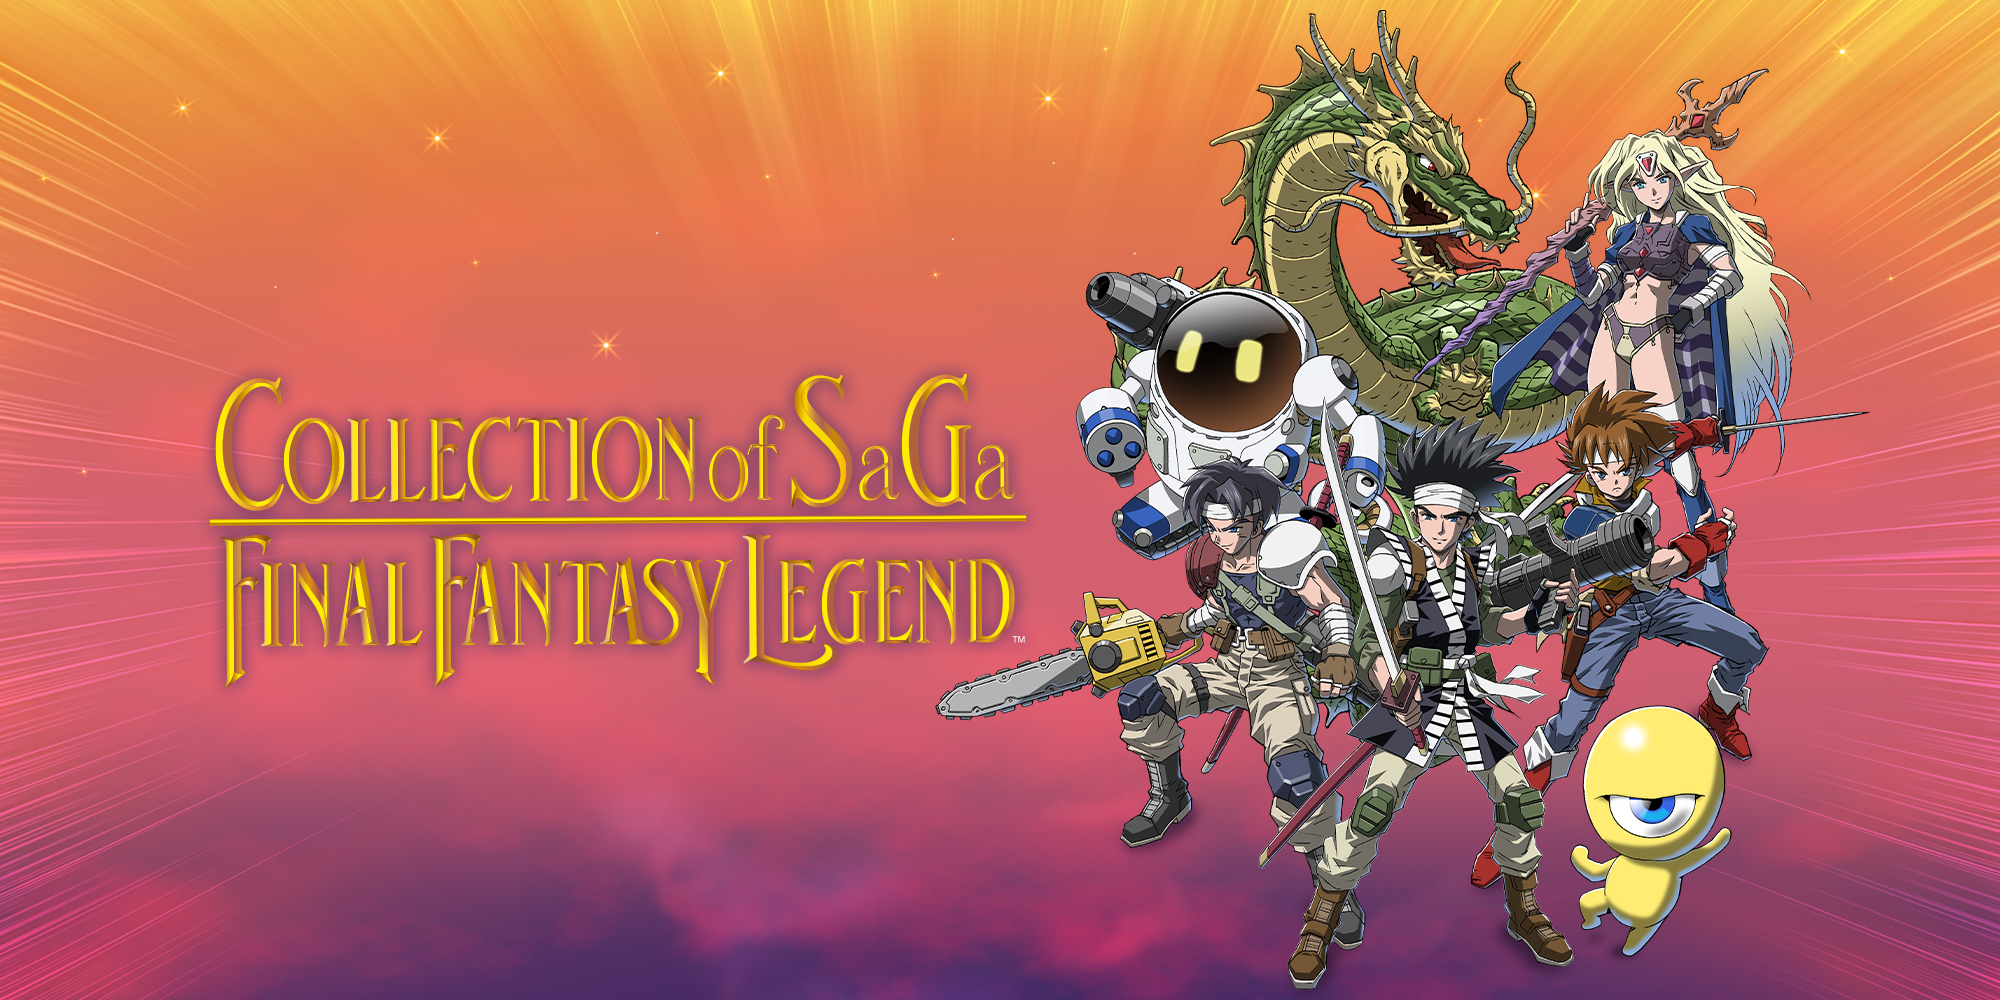 Collection of SaGa FINAL FANTASY LEGEND Announced For Switch